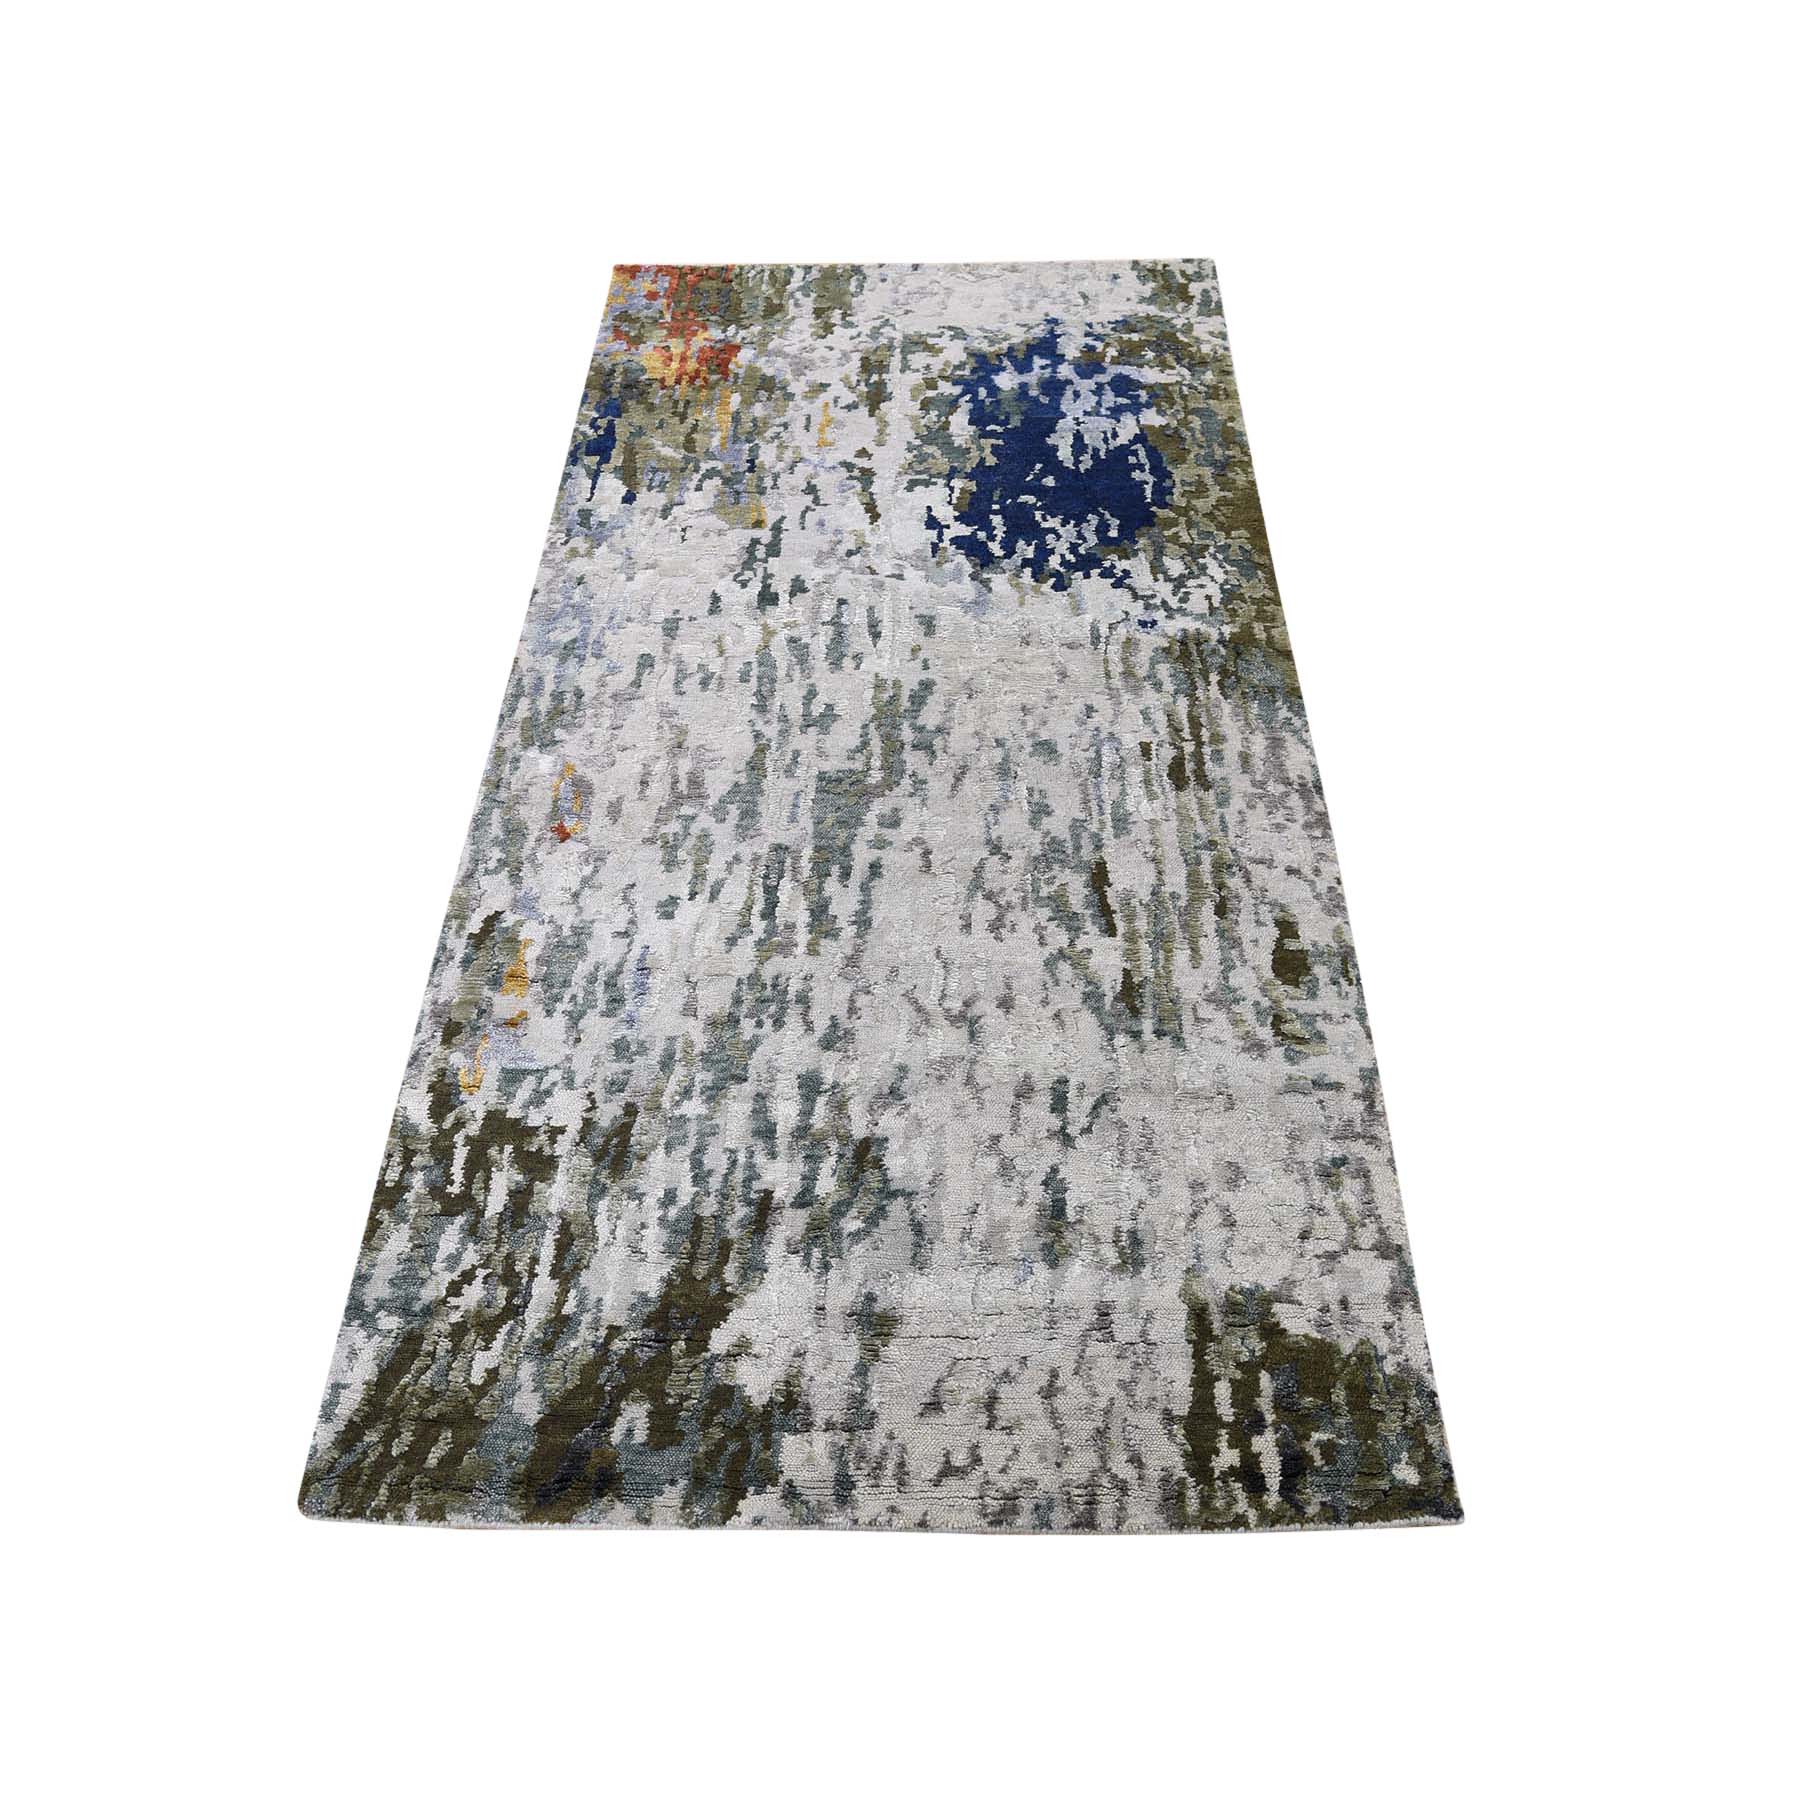 2-7 x8- Hi-Low Pile Abstract Design Wool And Silk Runner Hand-Knotted Oriental Rug 